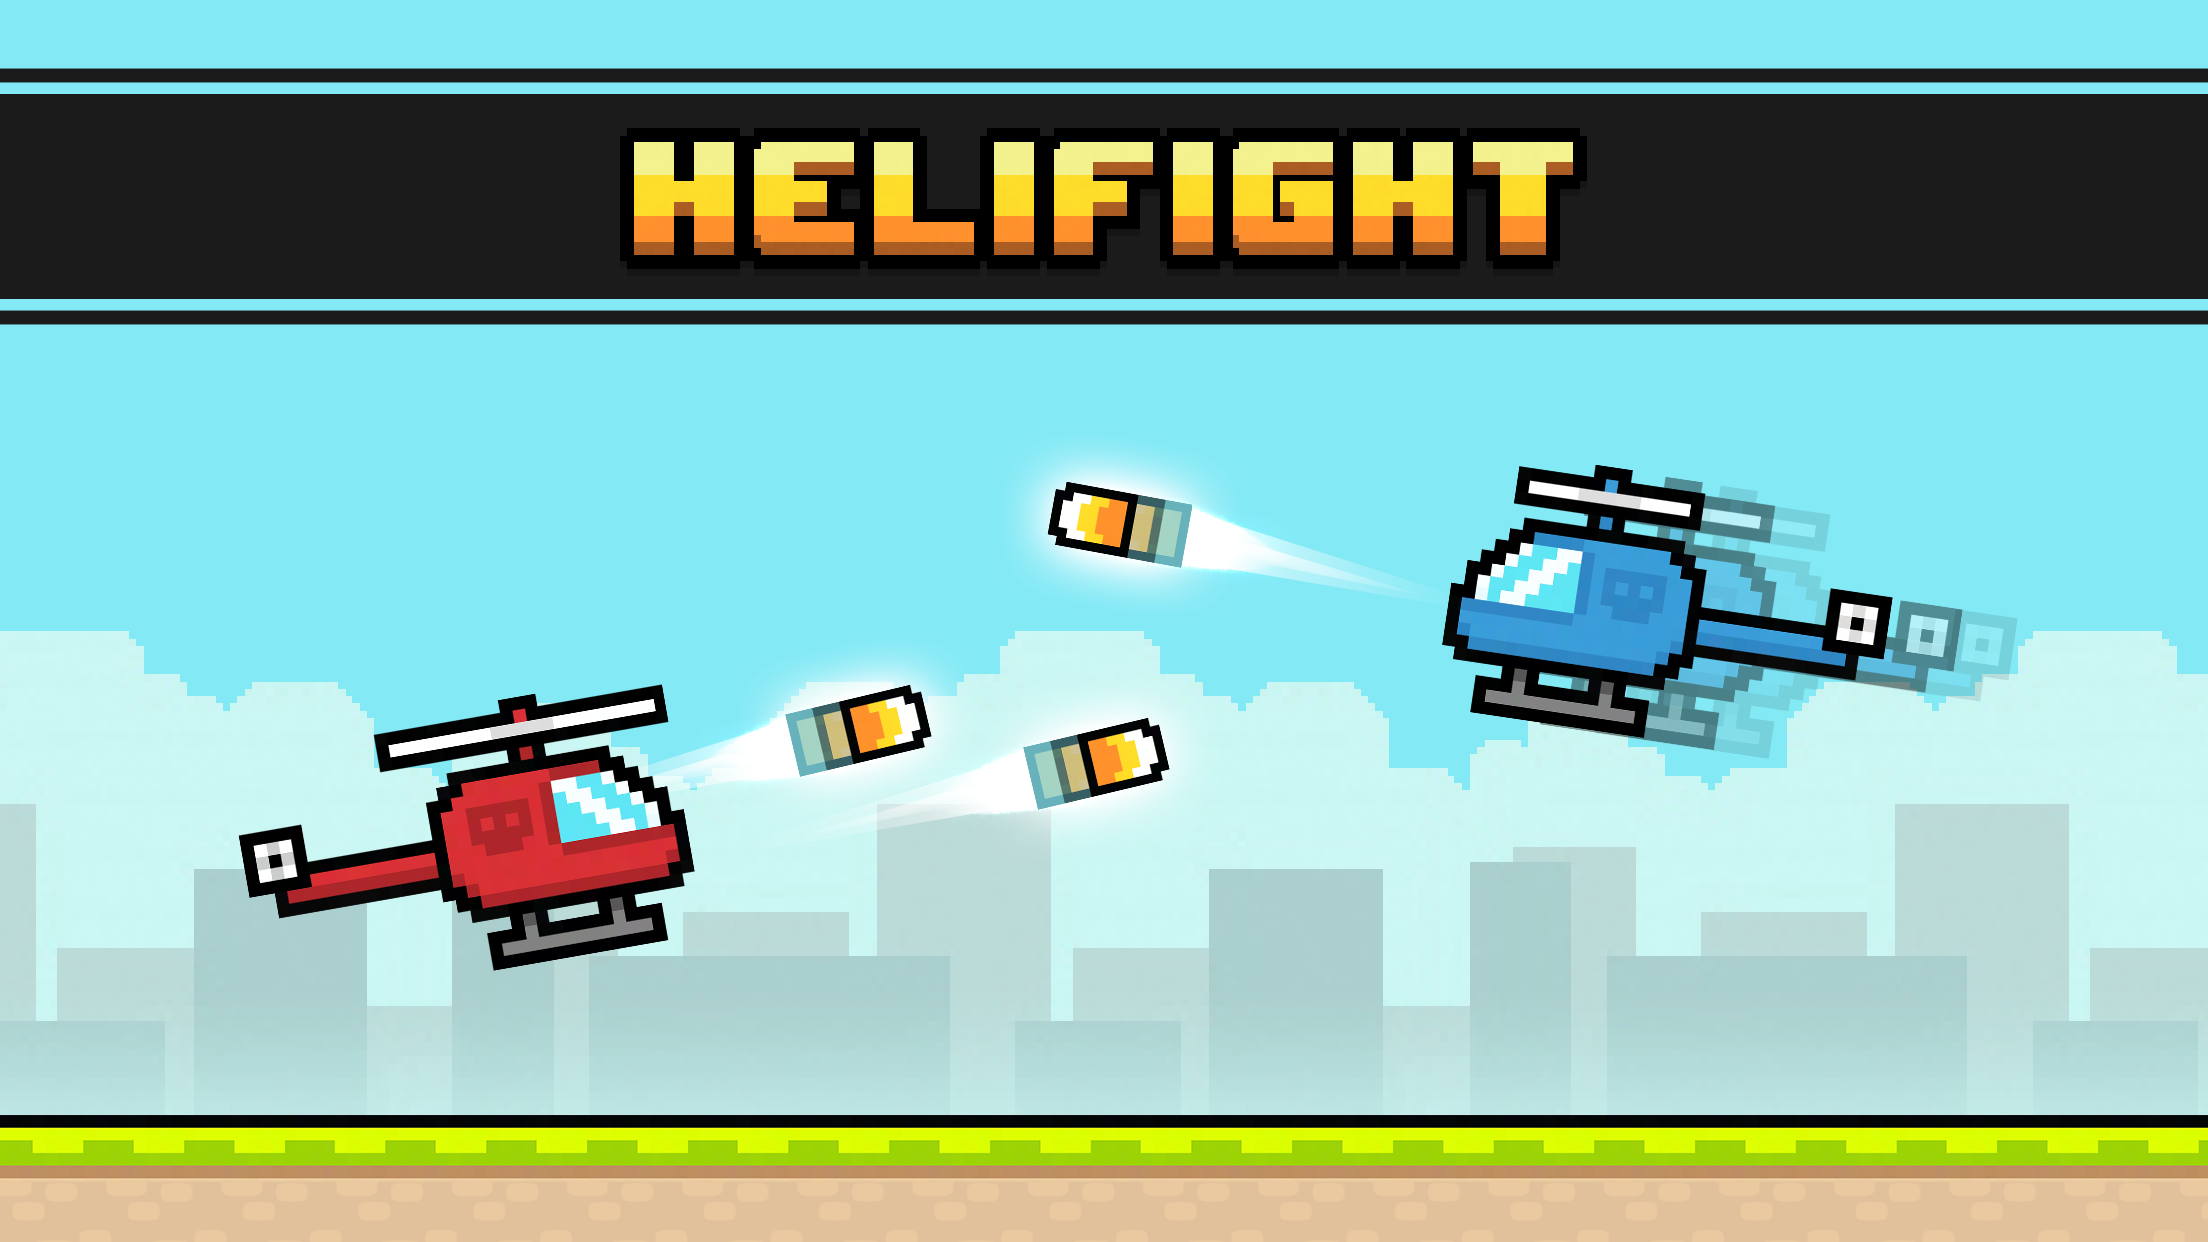 HeliFight